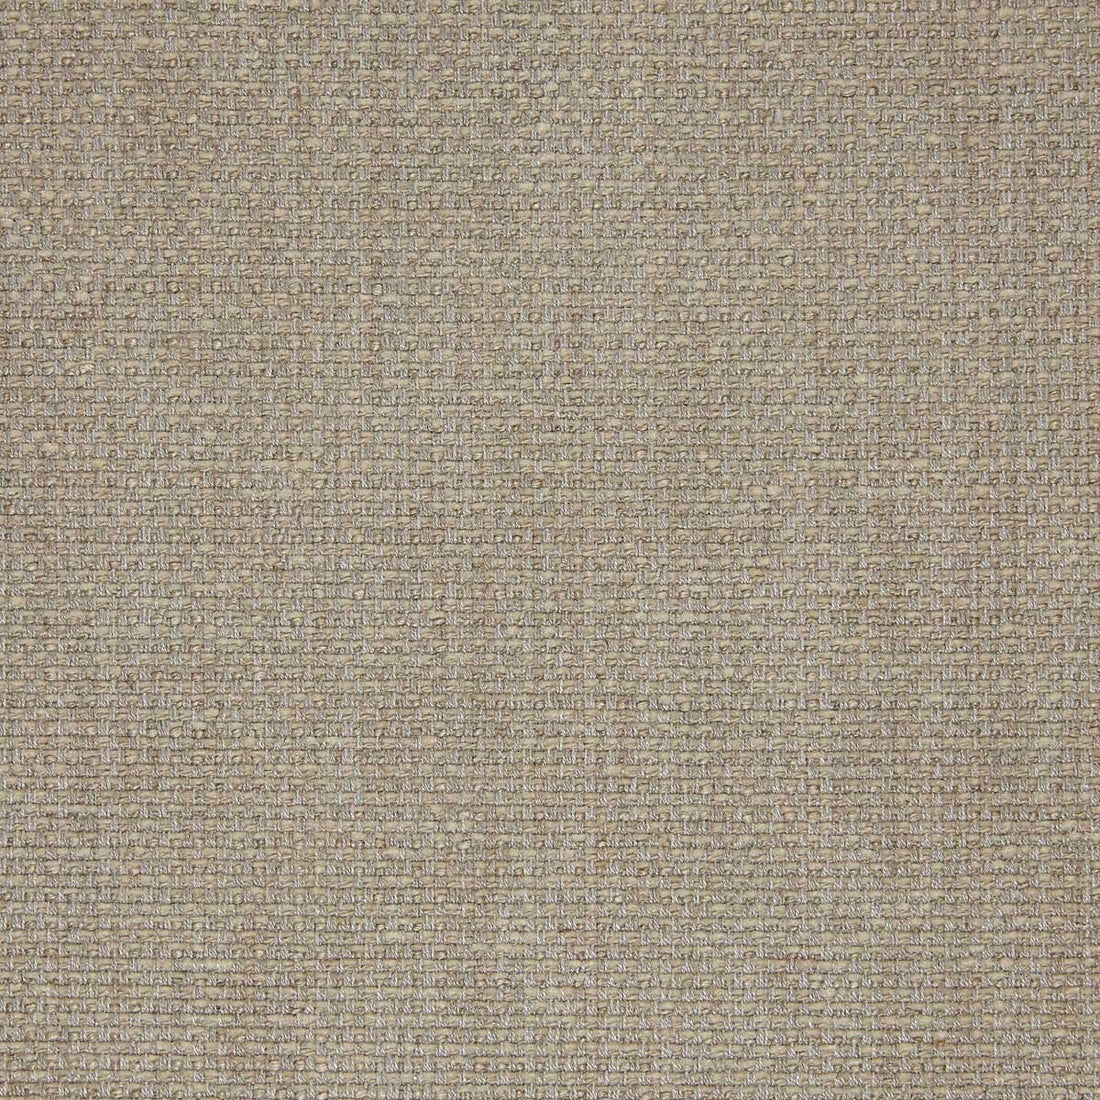 Godai fabric in 26 color - pattern LZ-30349.26.0 - by Kravet Design in the Lizzo collection